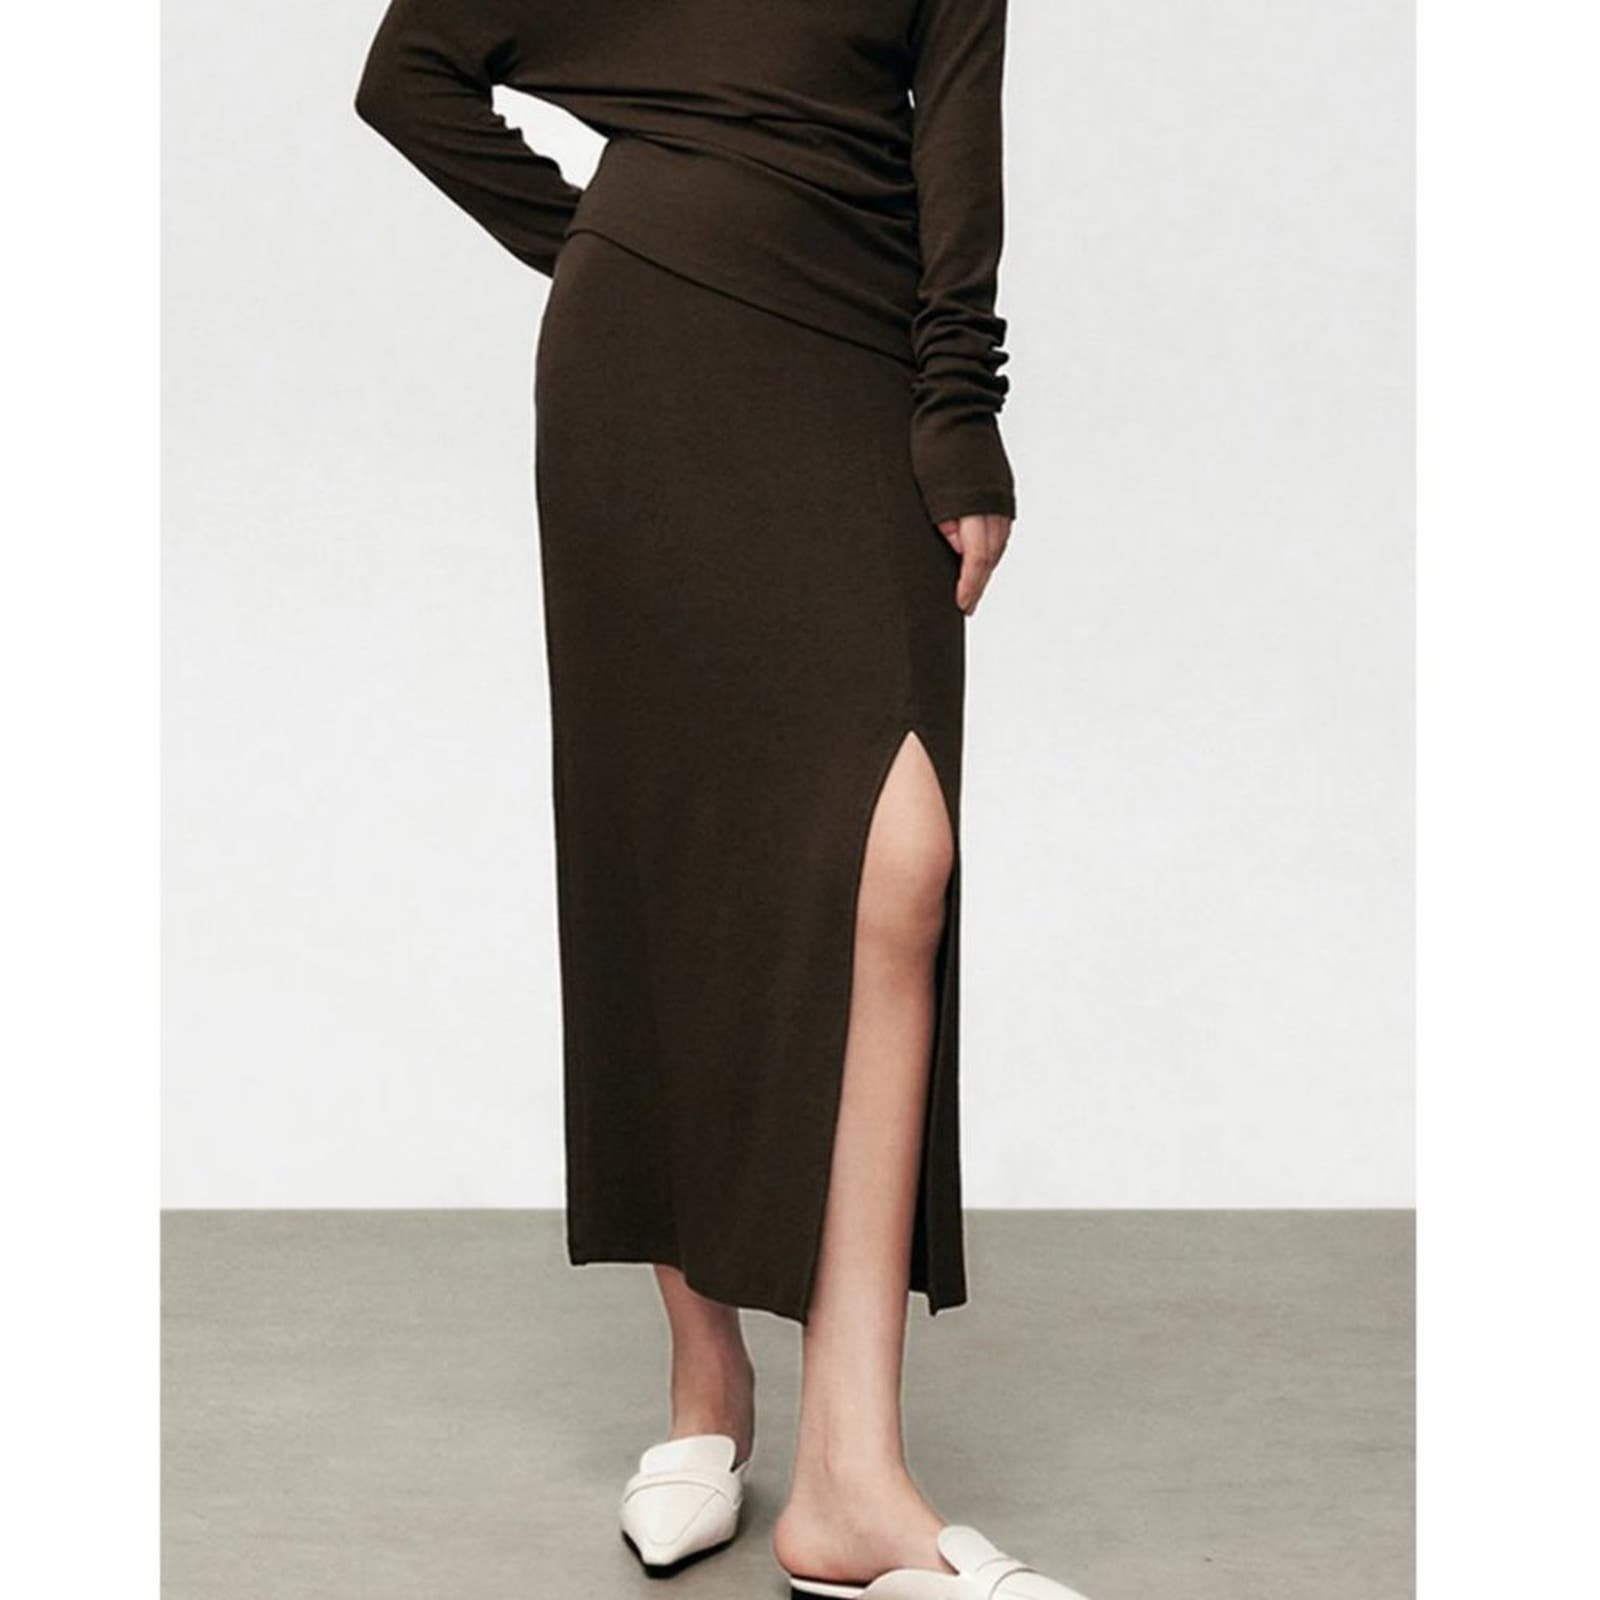 the Lowest price Commense High Waist Brown Midi Slit NW